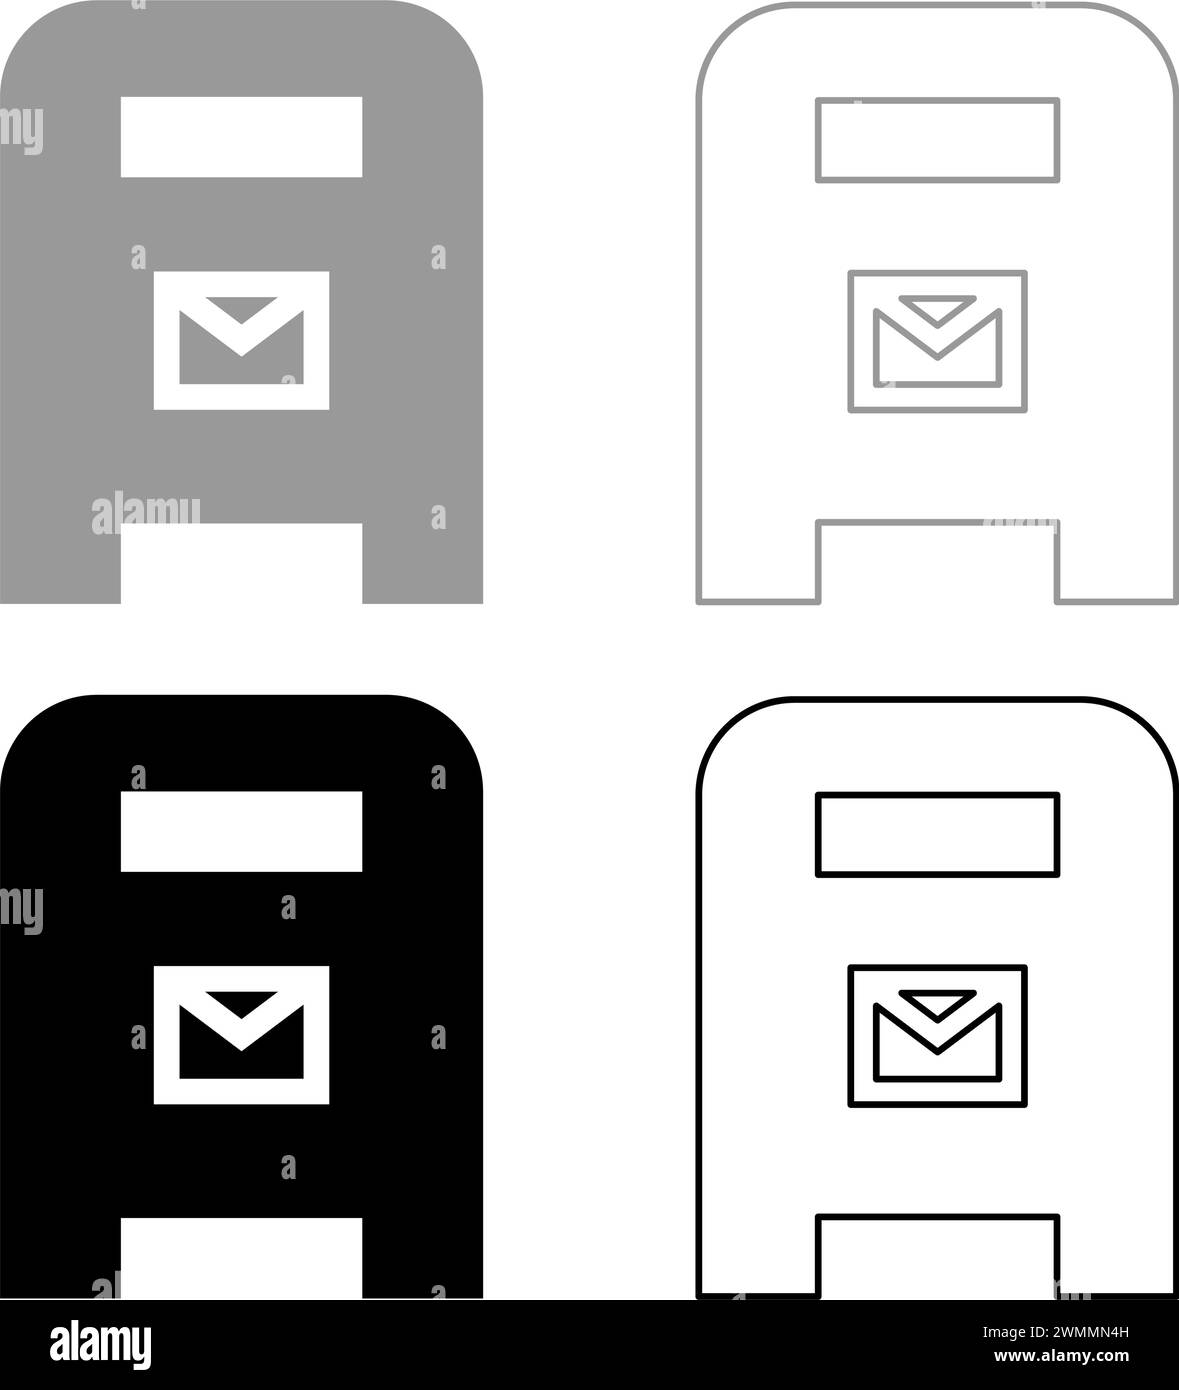 Post box mail postal letterbox mailbox set icon grey black color vector illustration image simple solid fill outline contour line thin flat style Stock Vector